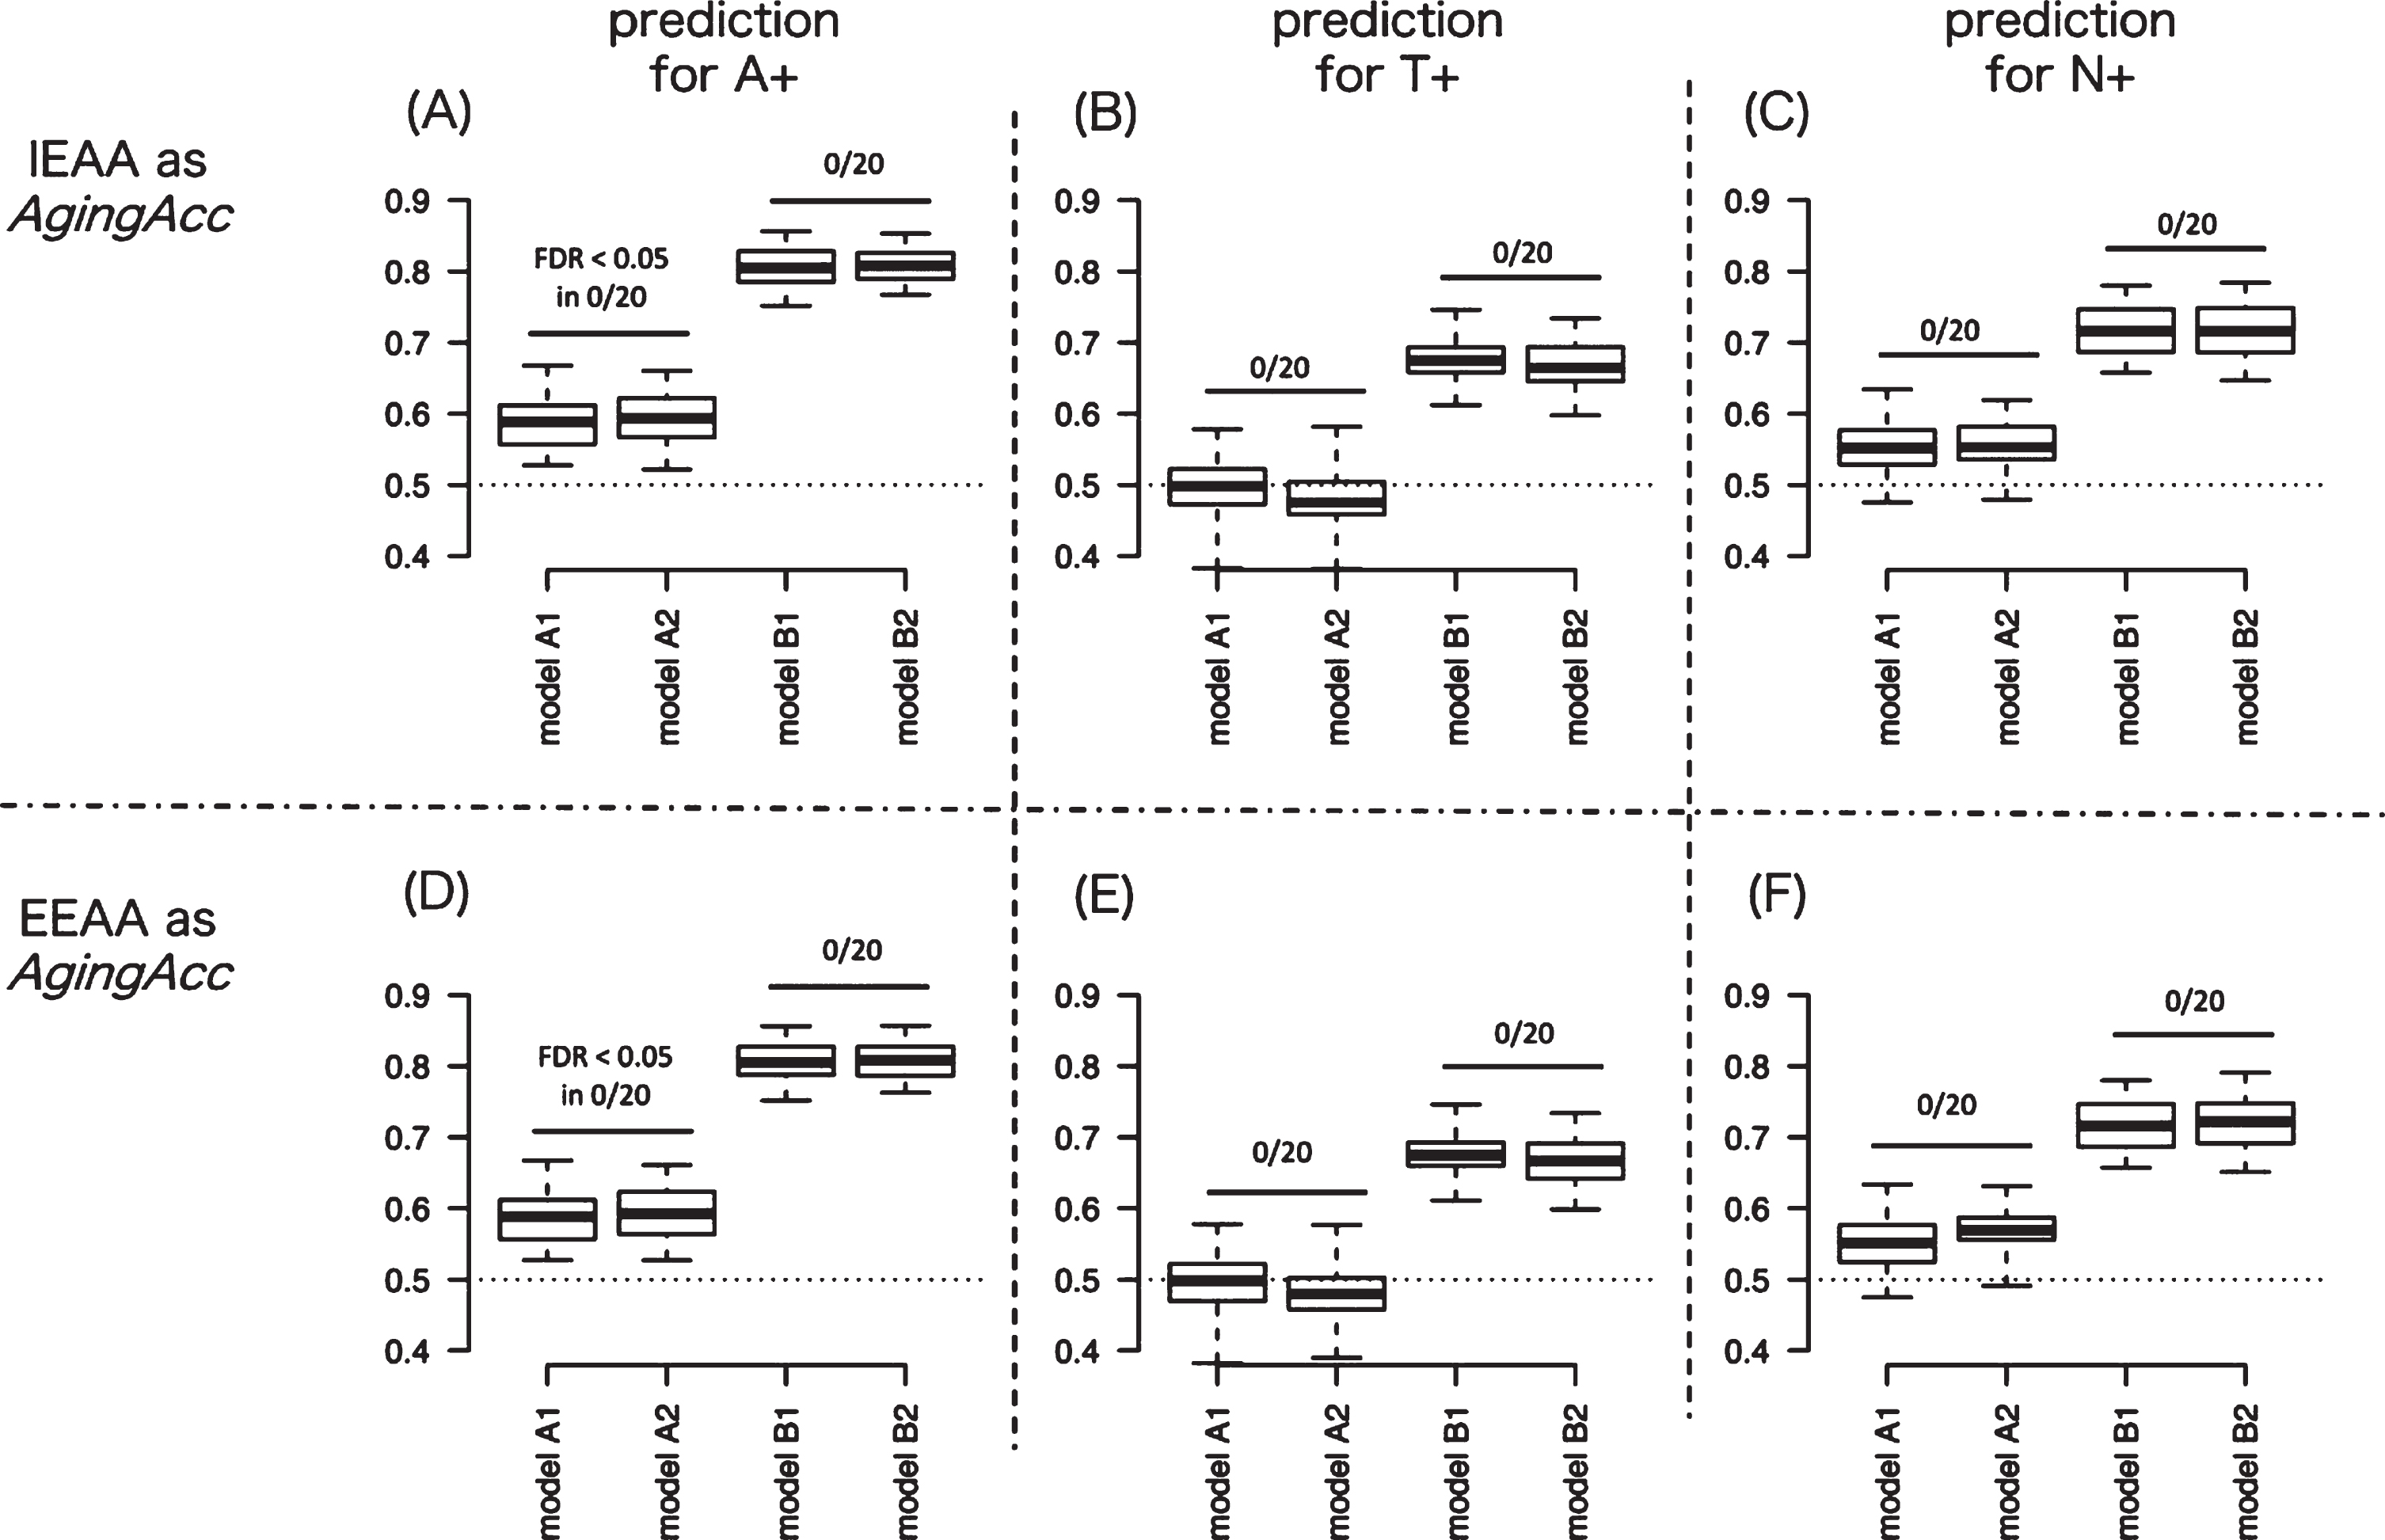 Degree of AUC performance improvement by incorporating aging acceleration. To measure the usefulness of aging acceleration, we evaluated the AUC between models with different combination of features (model A1–B2). Panels A and D show the AUC results by 20 times of repeated trials predicting for A+ when IEAA (in A) or EEAA (in D) is included as epigenetic aging. Similarly, panels B and E show the AUC results predicting for T+ when IEAA (in B) or EEAA (in E) is included as epigenetic aging. And panels C and F show the AUC results predicting for N+ when IEAA (in C) or EEAA (in F) is included as epigenetic aging. The AUC results were compared between model A versus B and between model C versus D in panels A–F: significantly high AUC for A+ or T+ or N+ was not observed in any model pairs compared (as denoted by ‘FDR < 0.05 in 0/20’ in figures), across 20 times of randomization trials. In the box plot, upper and lower whiskers correspond to the maximum and minimum range, and the range of box corresponds to the interquartile range. Y-axis corresponds to the value of AUC. AUC, area under curve; AgingAcc, aging acceleration calculated based on the methylation clock and the actual chronological age; IEAA, intrinsic epigenetic aging acceleration; EEAA, extrinsic epigenetic aging acceleration; FDR, false-discovery rate.